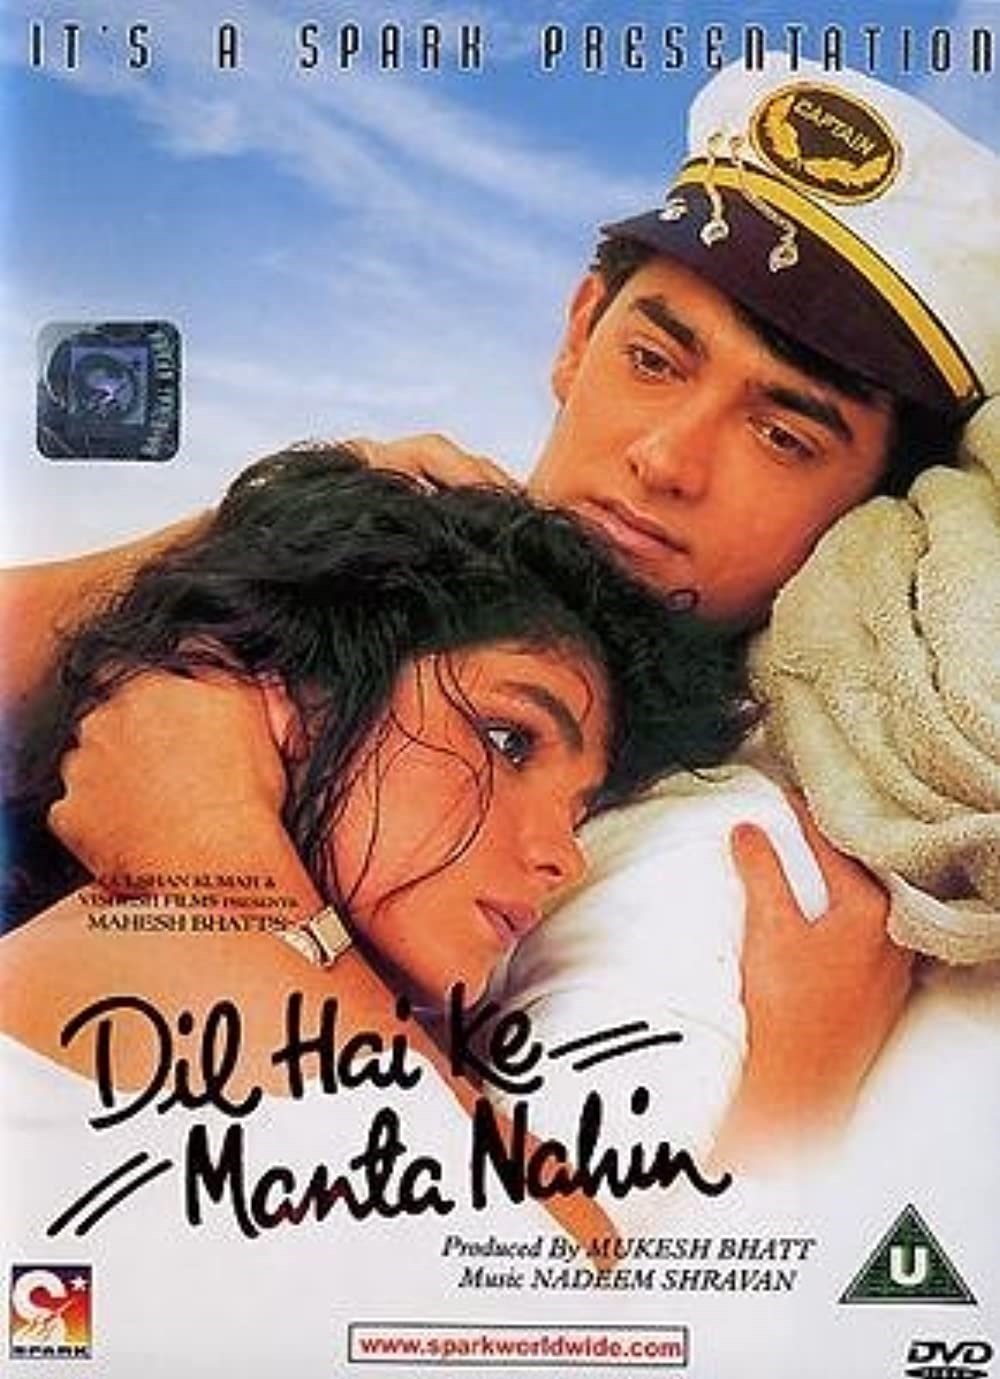 dil to pagal hai movie online with english subtitles